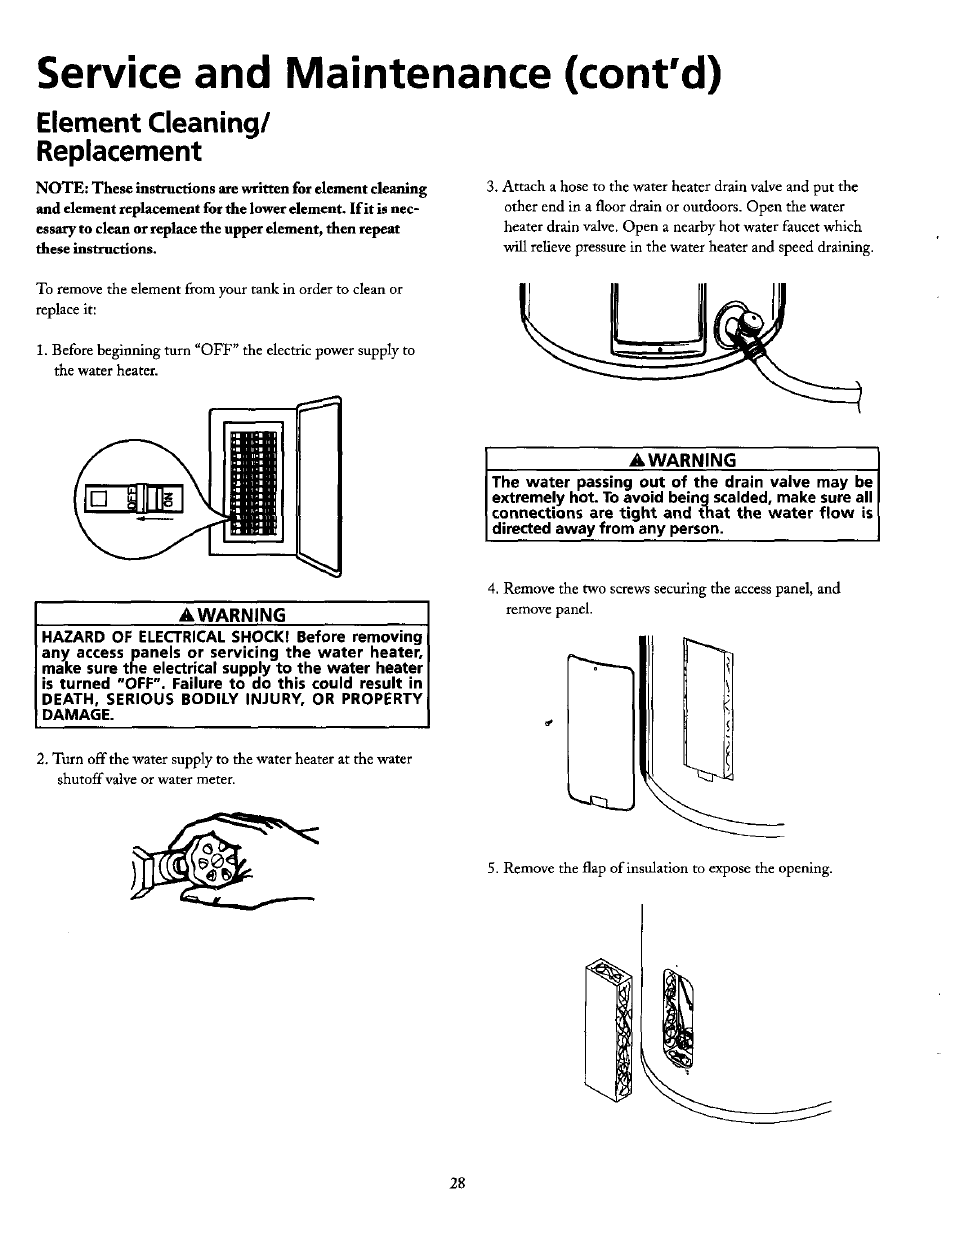 Element cleaning, Replacement, Service and maintenance (cont'd) | Element cleaning/ replacement | Maytag HE21250PC User Manual | Page 28 / 40